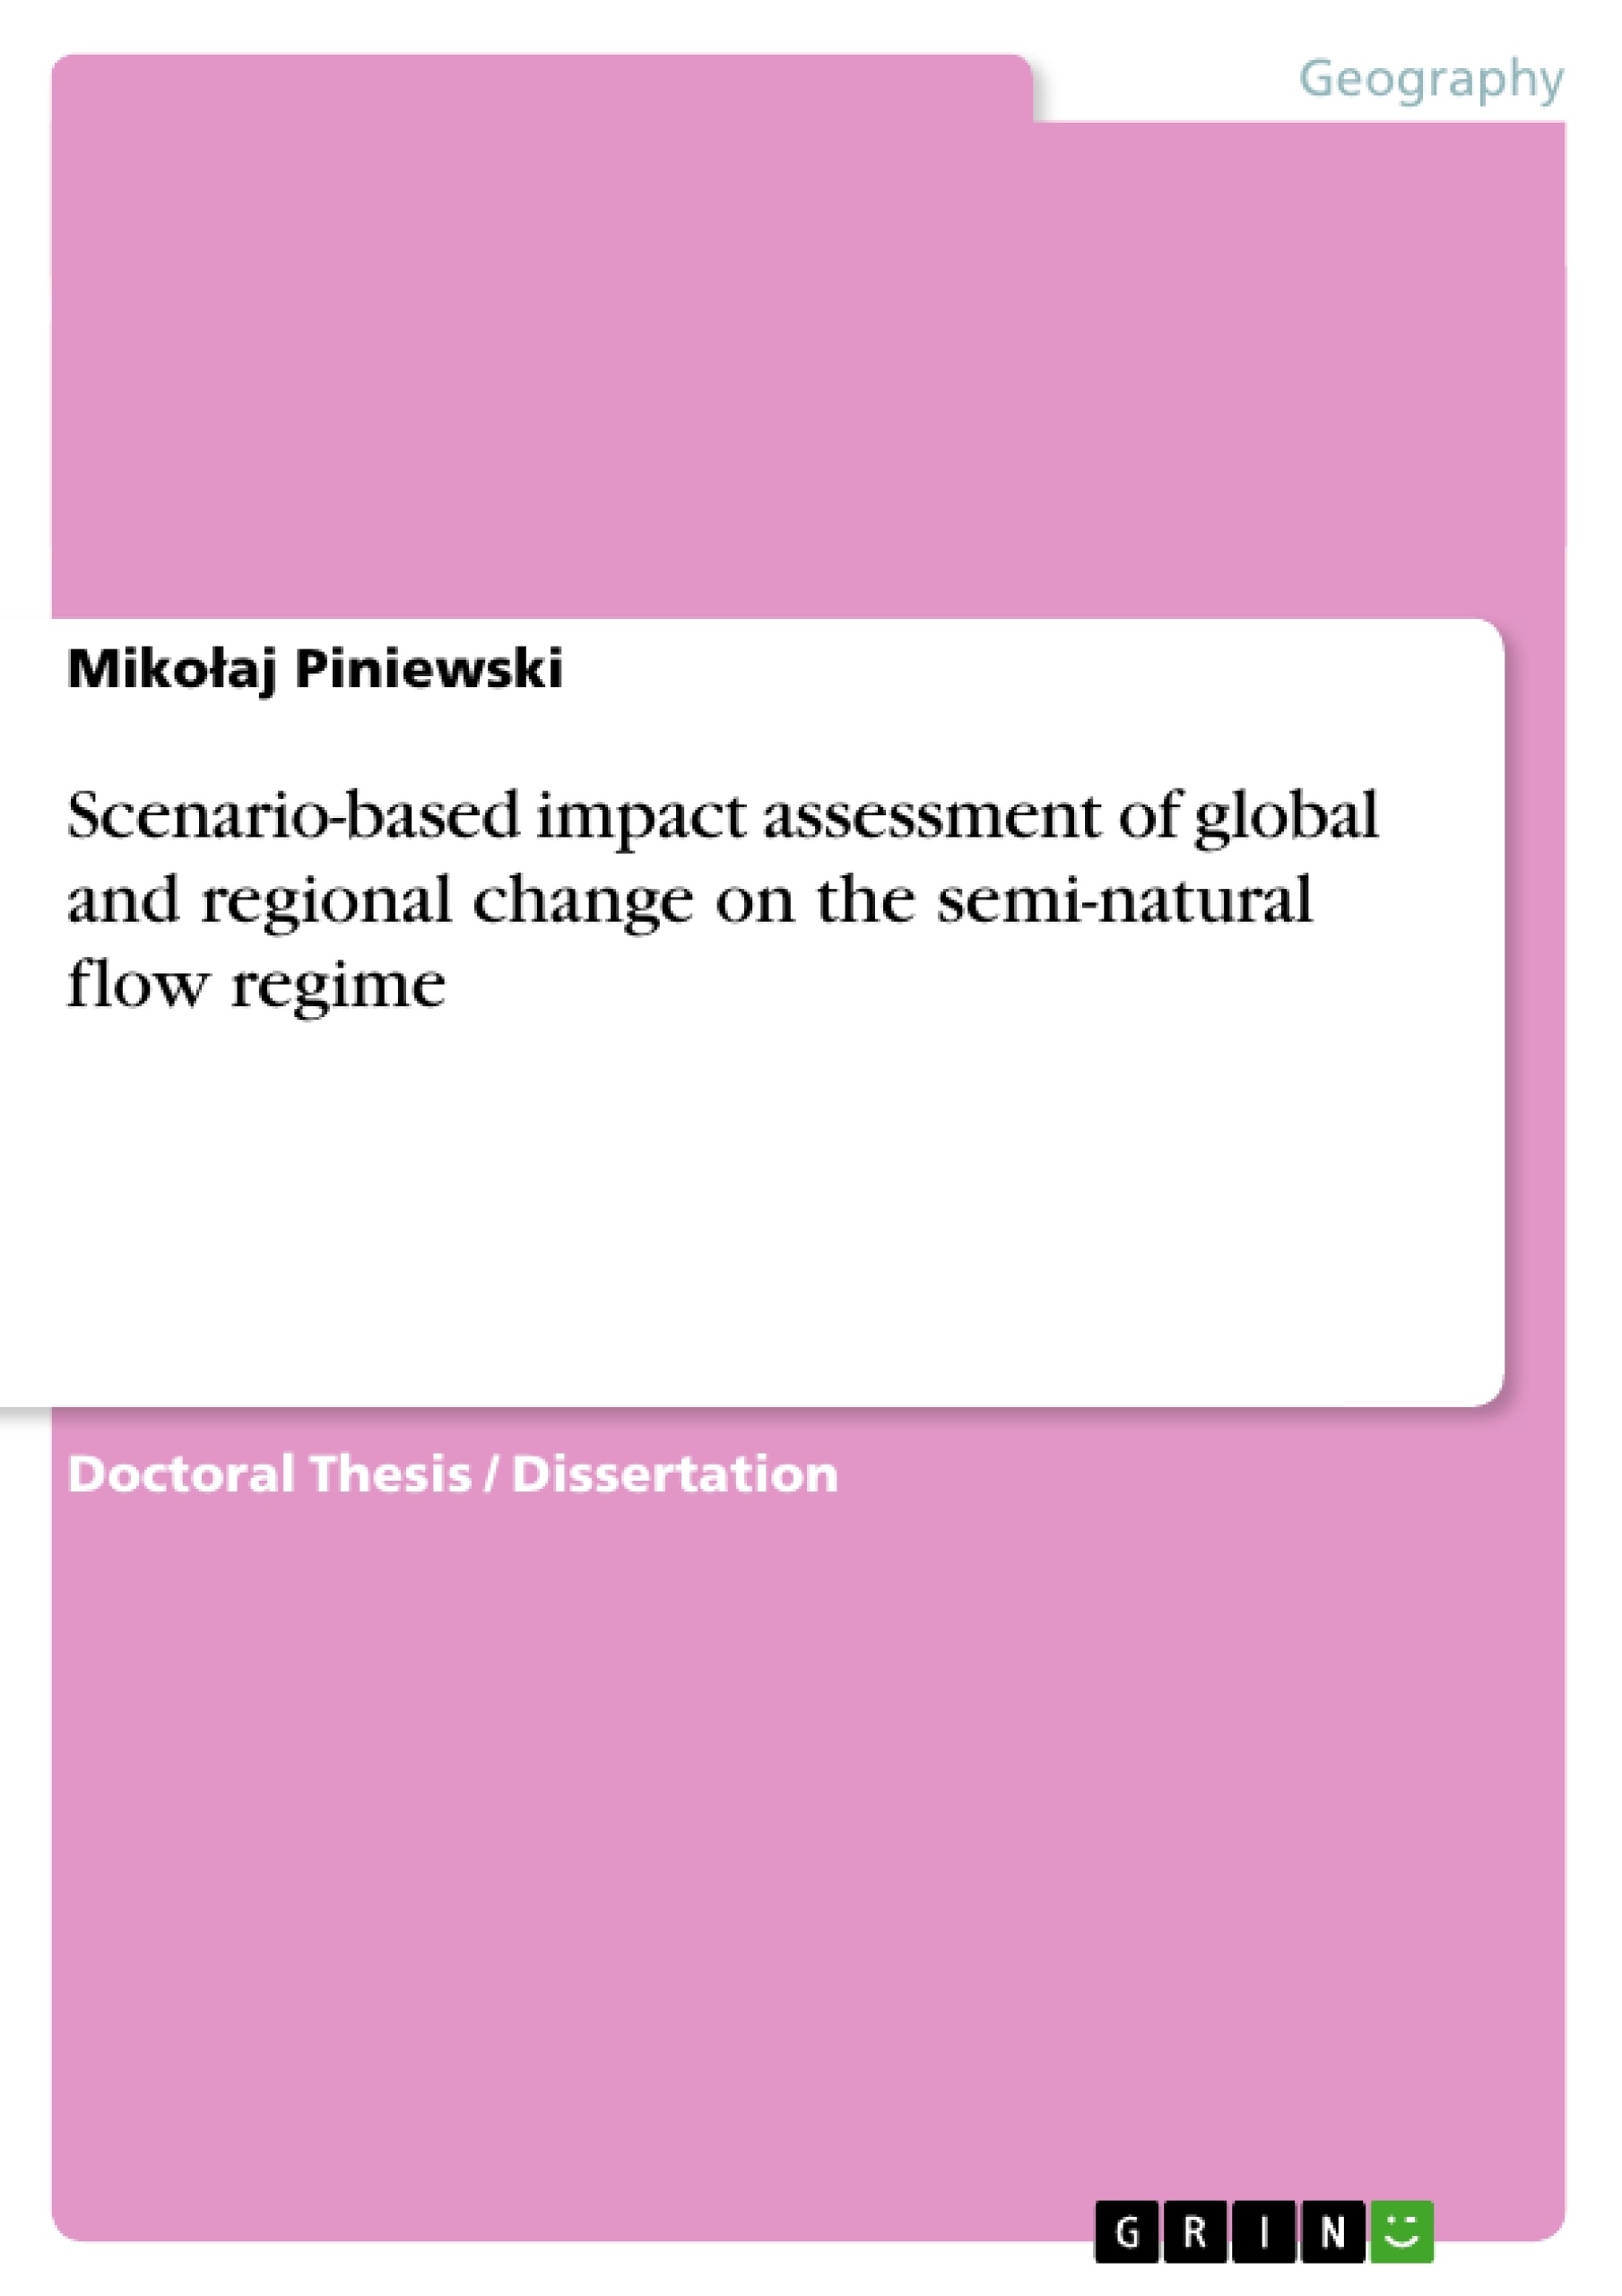 Title: Scenario-based impact assessment of global and regional change on the semi-natural flow regime